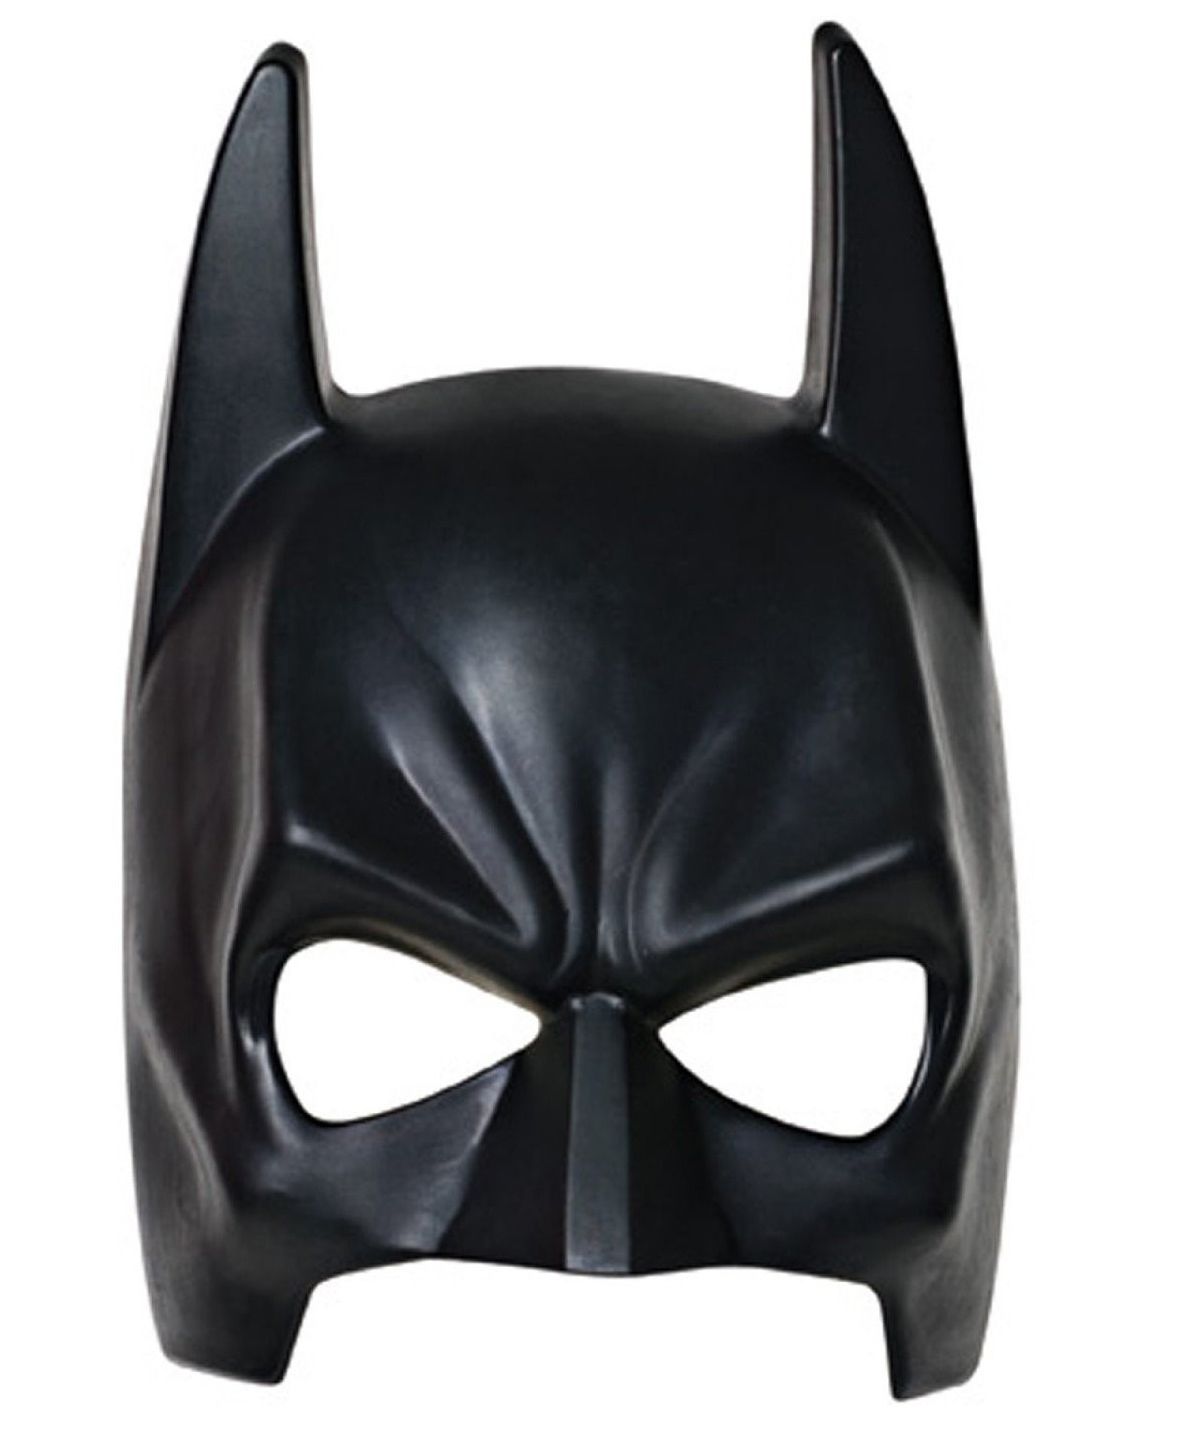 Funcart Batman Face Mask - Black Online in India, Buy at Best Price from   - 2117727